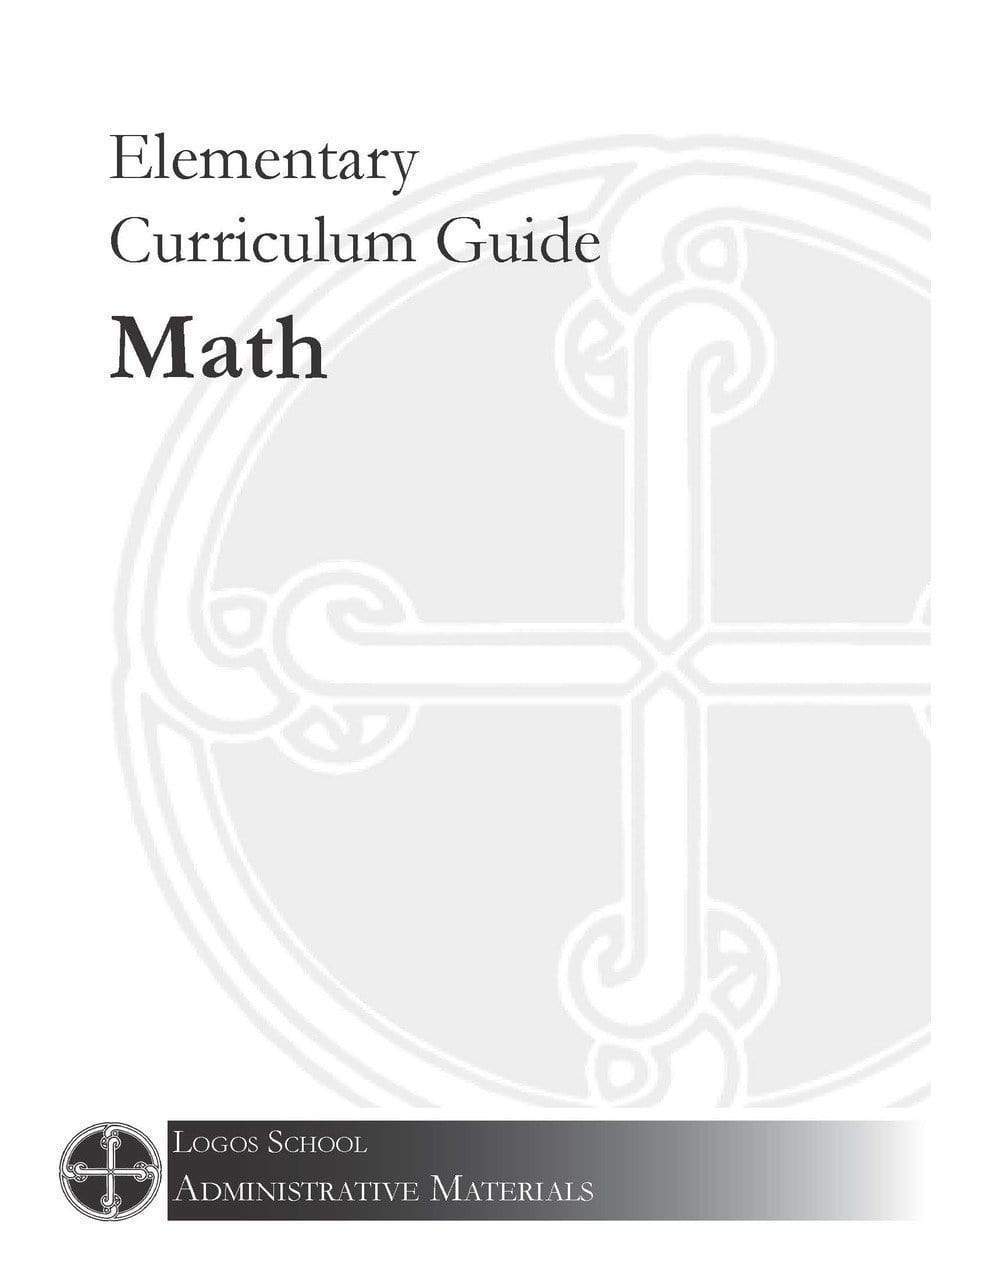 Elementary Curriculum Guide - Math (Download)